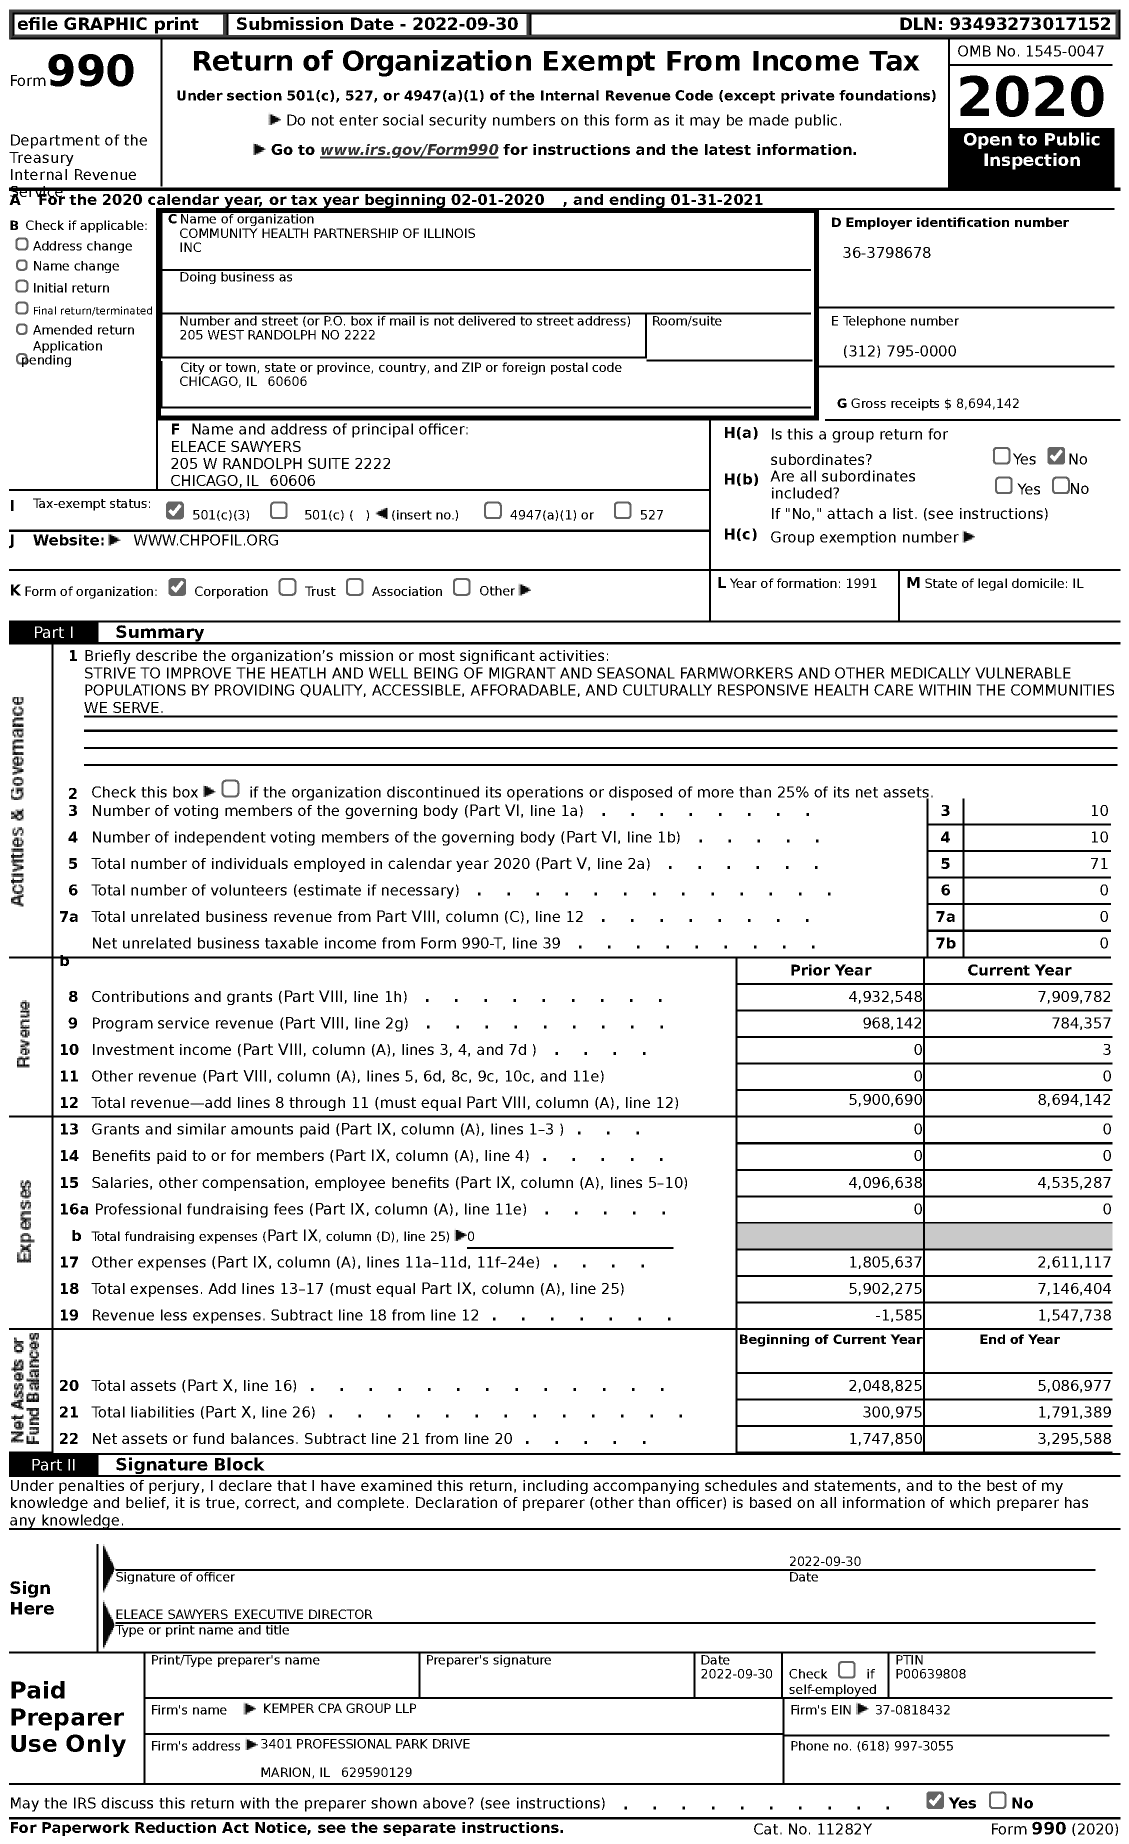 Image of first page of 2020 Form 990 for Community Health Partnership of Illinois (CHP)